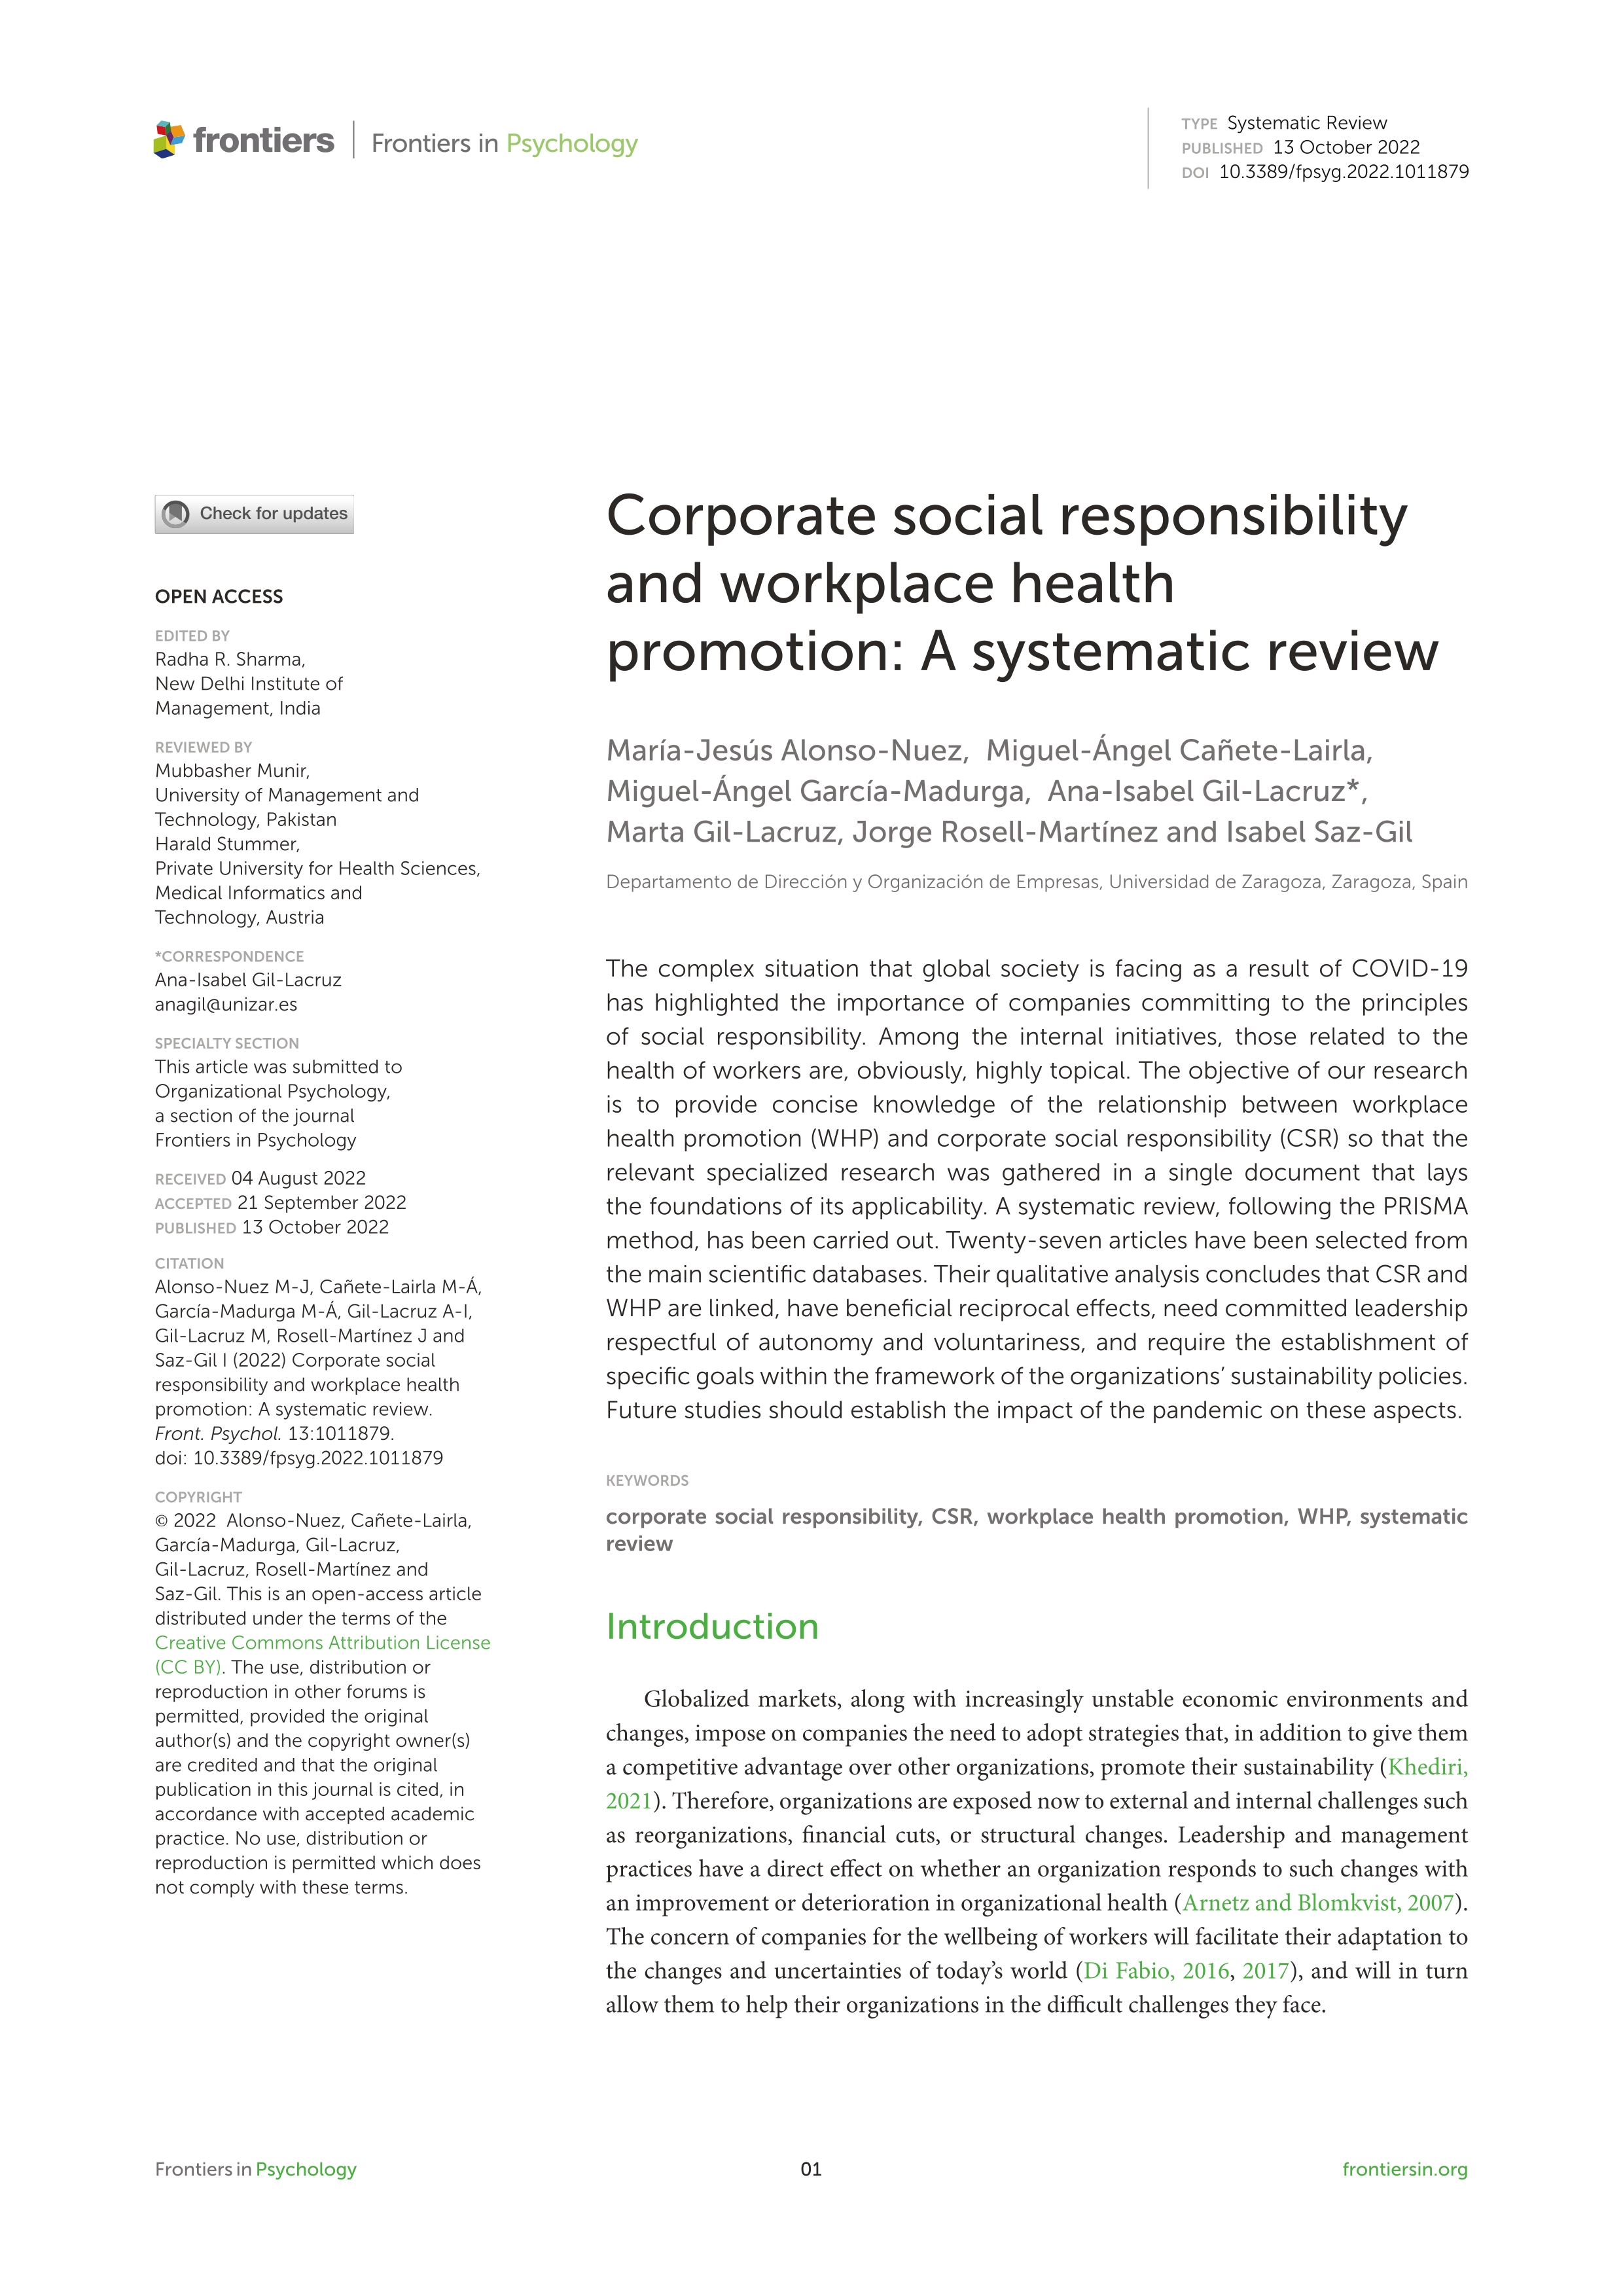 Corporate social responsibility and workplace health promotion: A systematic review